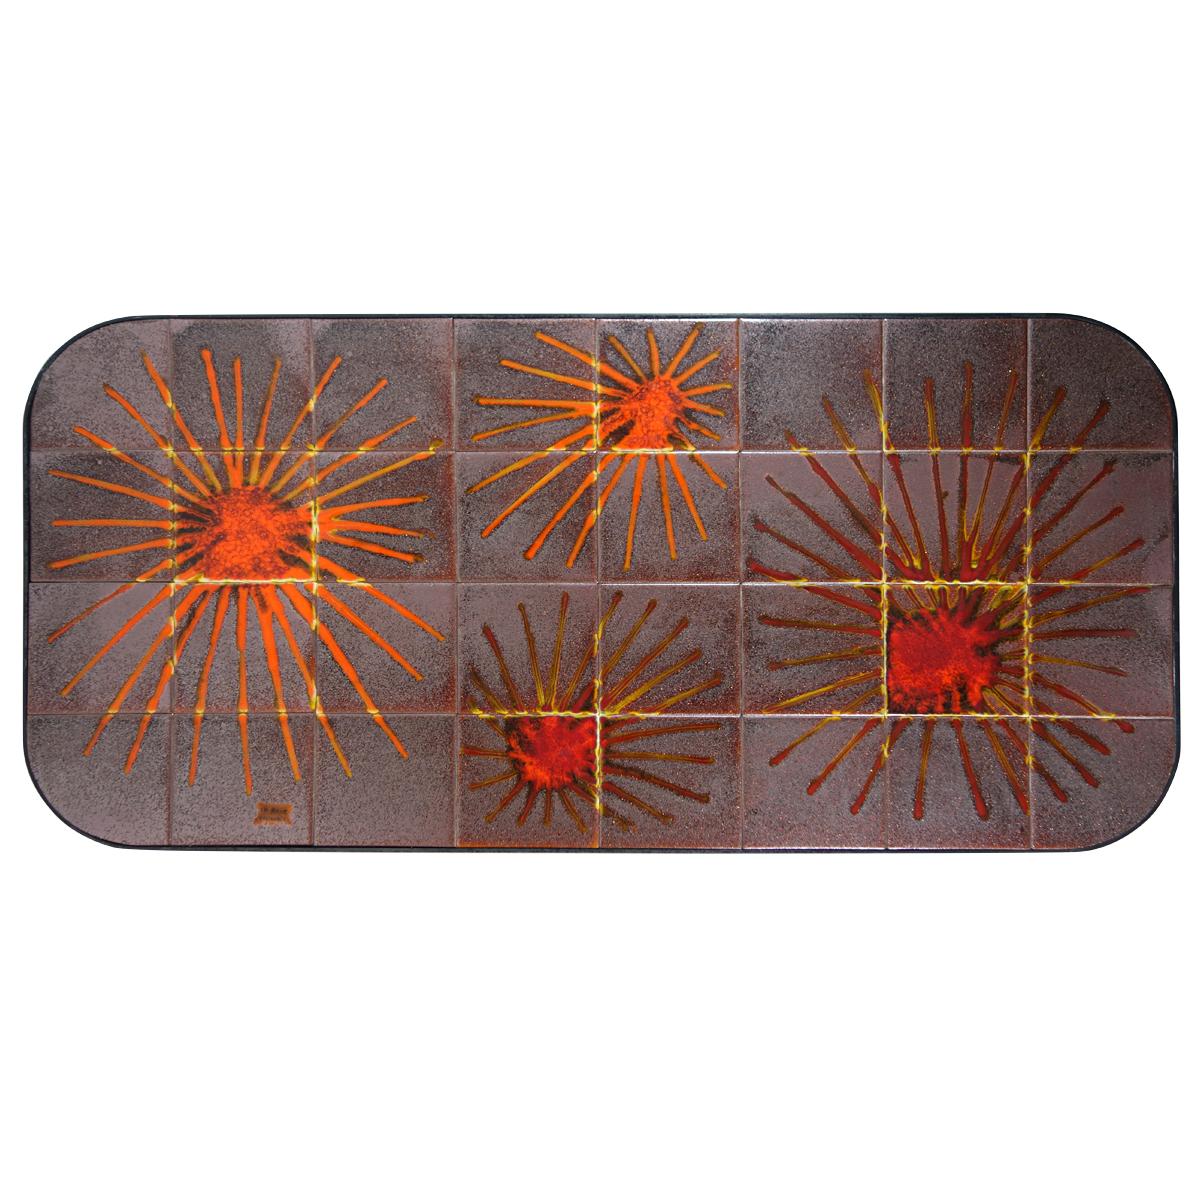 Mid-Century Modern Rectangular Midcentury Coffee Table with Sun Tile Decor La Roue by Vallauris For Sale